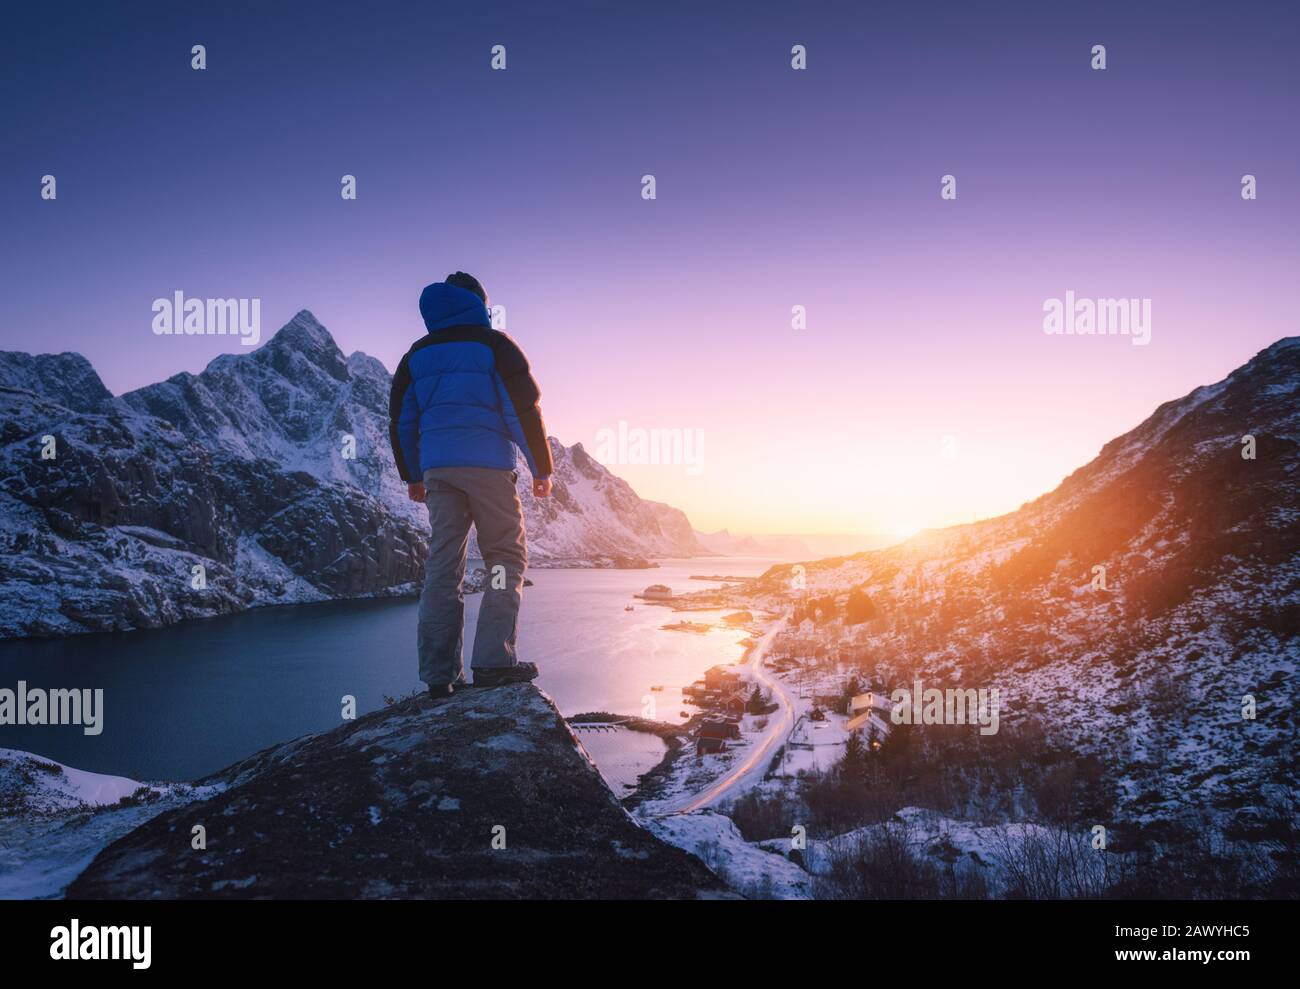 Man is standing on the mountain peak against snowy fjord Stock Photo